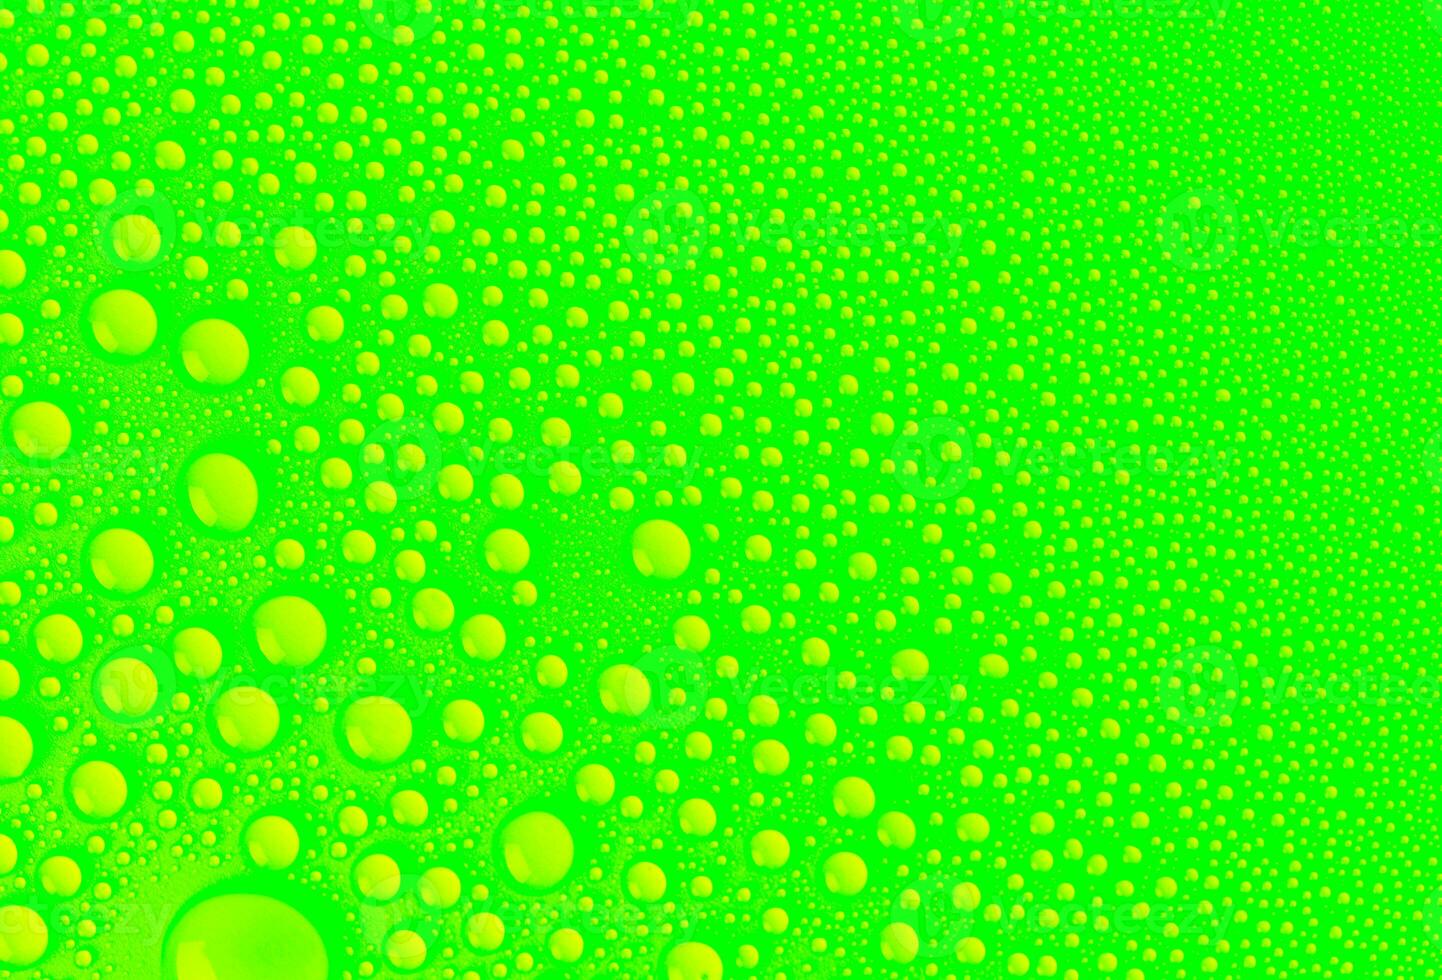 Colorful Water drops background design photo